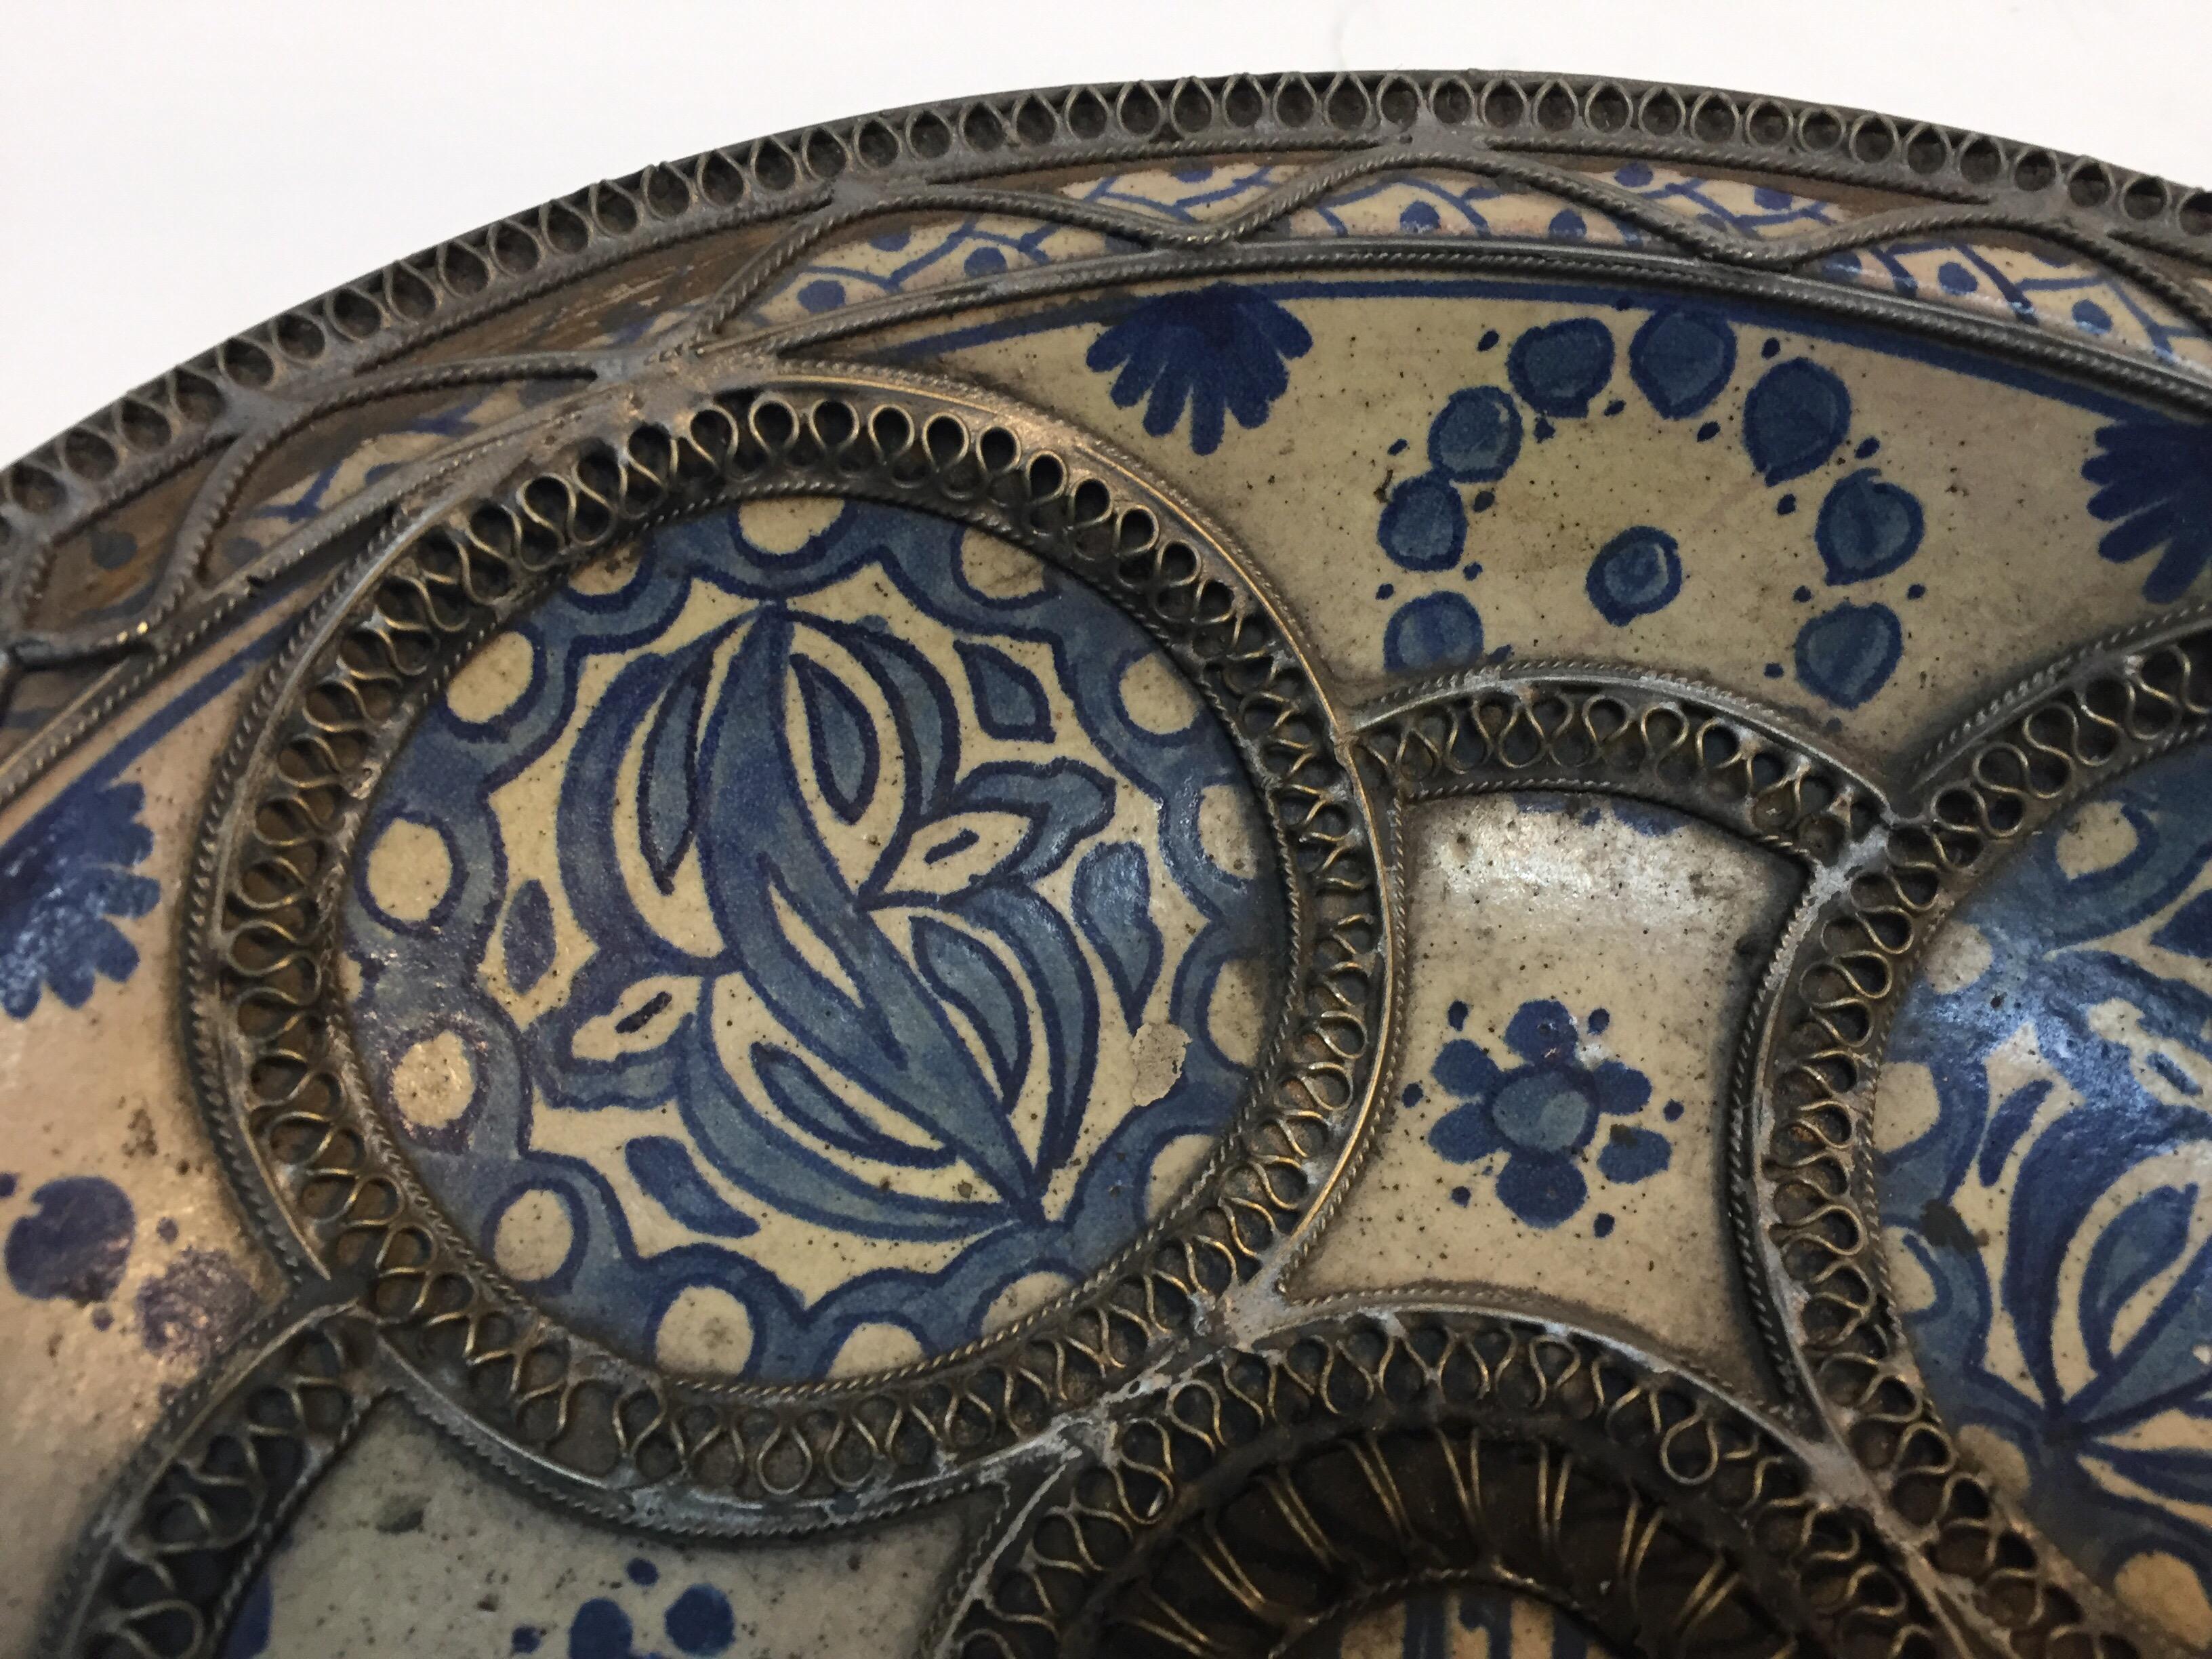 Decorative Moroccan Blue and White Handcrafted Ceramic Bowl from Fez 4